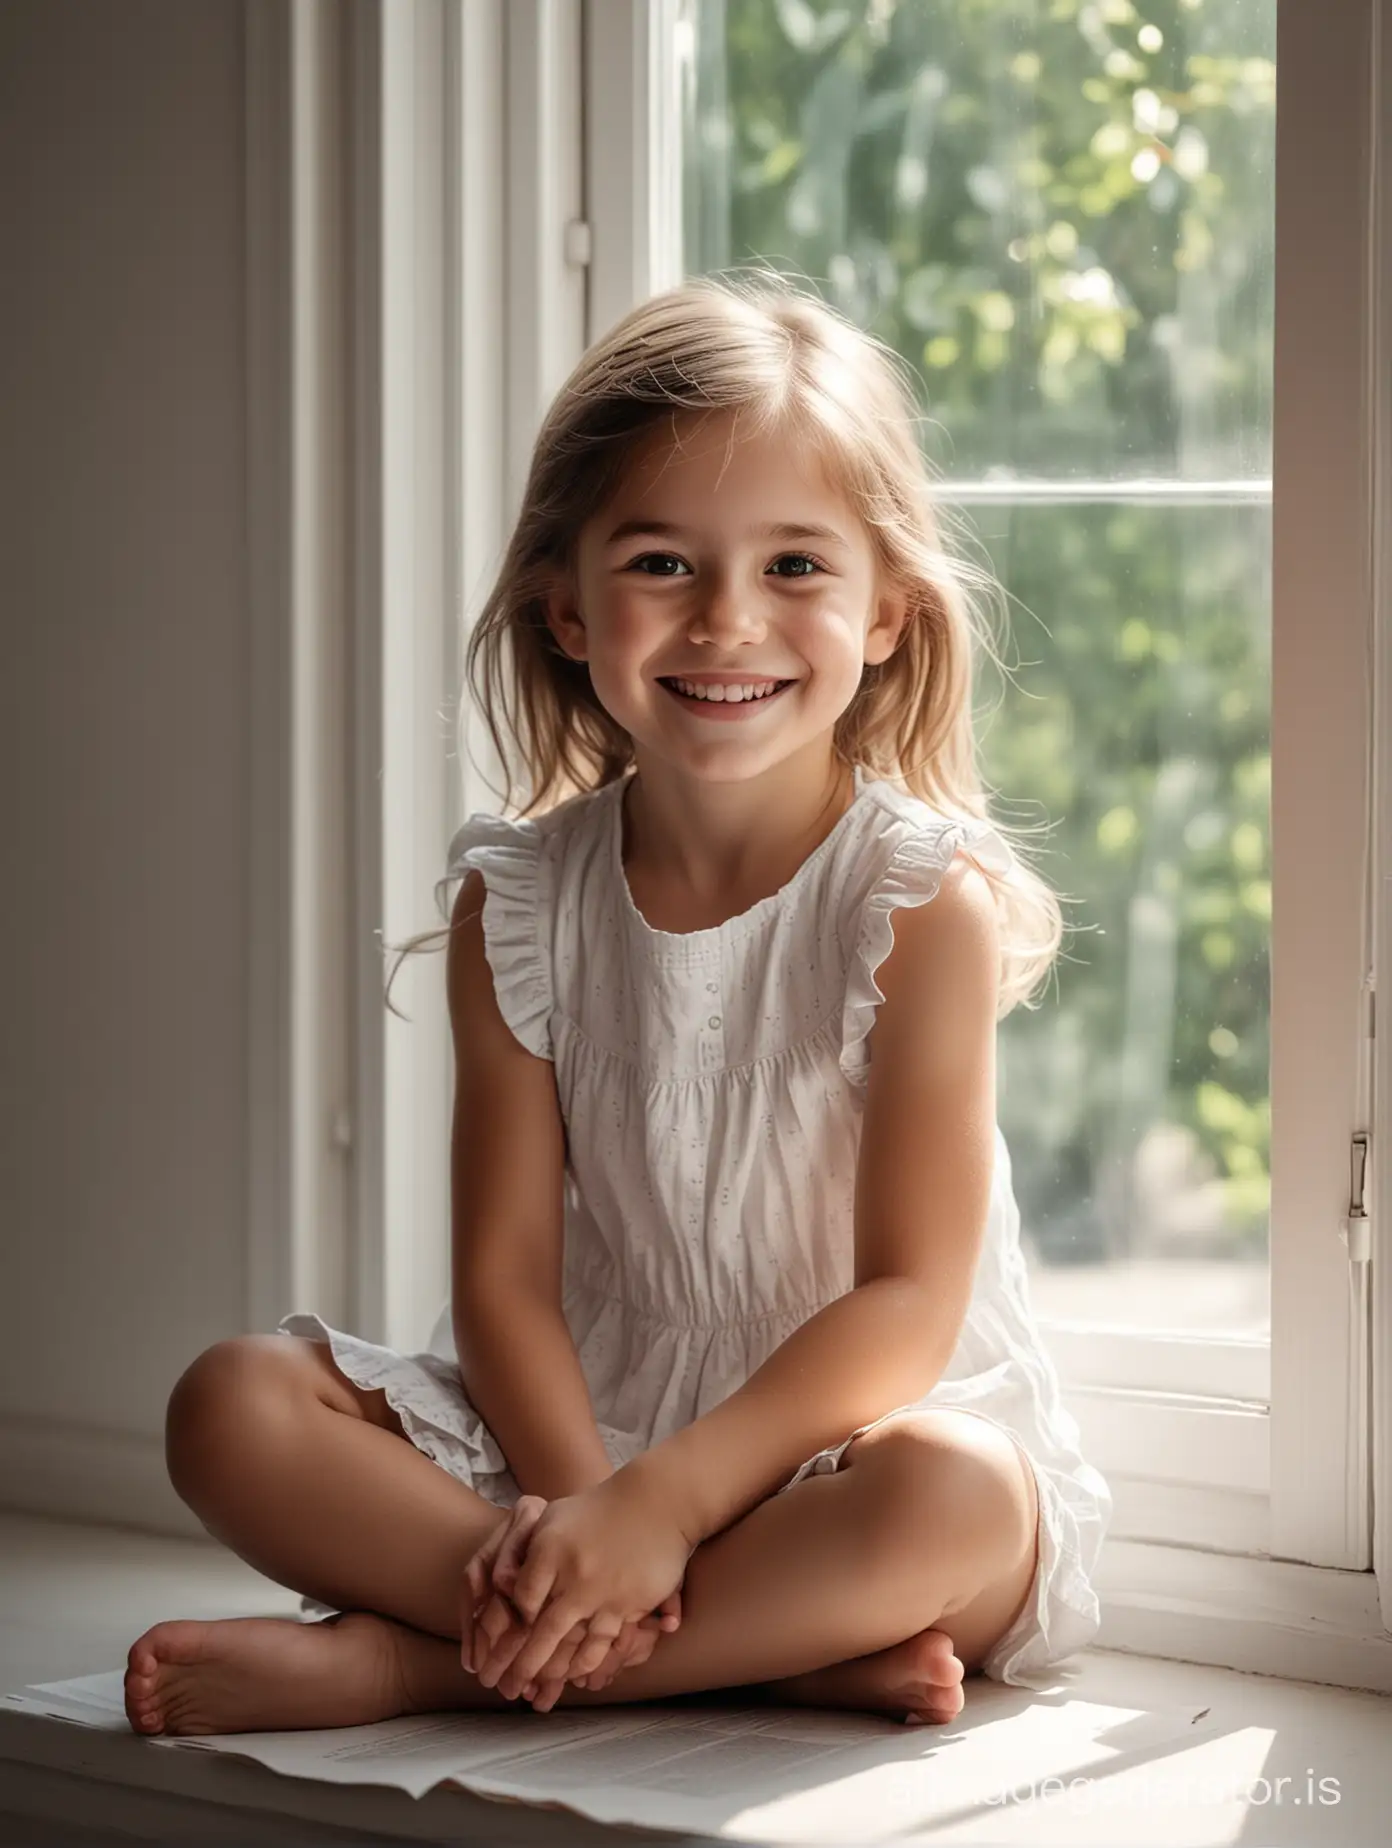 High-quality photo: full body portrait of a smiling little girl sitting by a window, showing us a white paper. Photorealistic, high contrast, highly detailed, awesome lighting, 4k resolution, cinematic. The lighting from the window should highlight the texture and realism of her skin and hands.